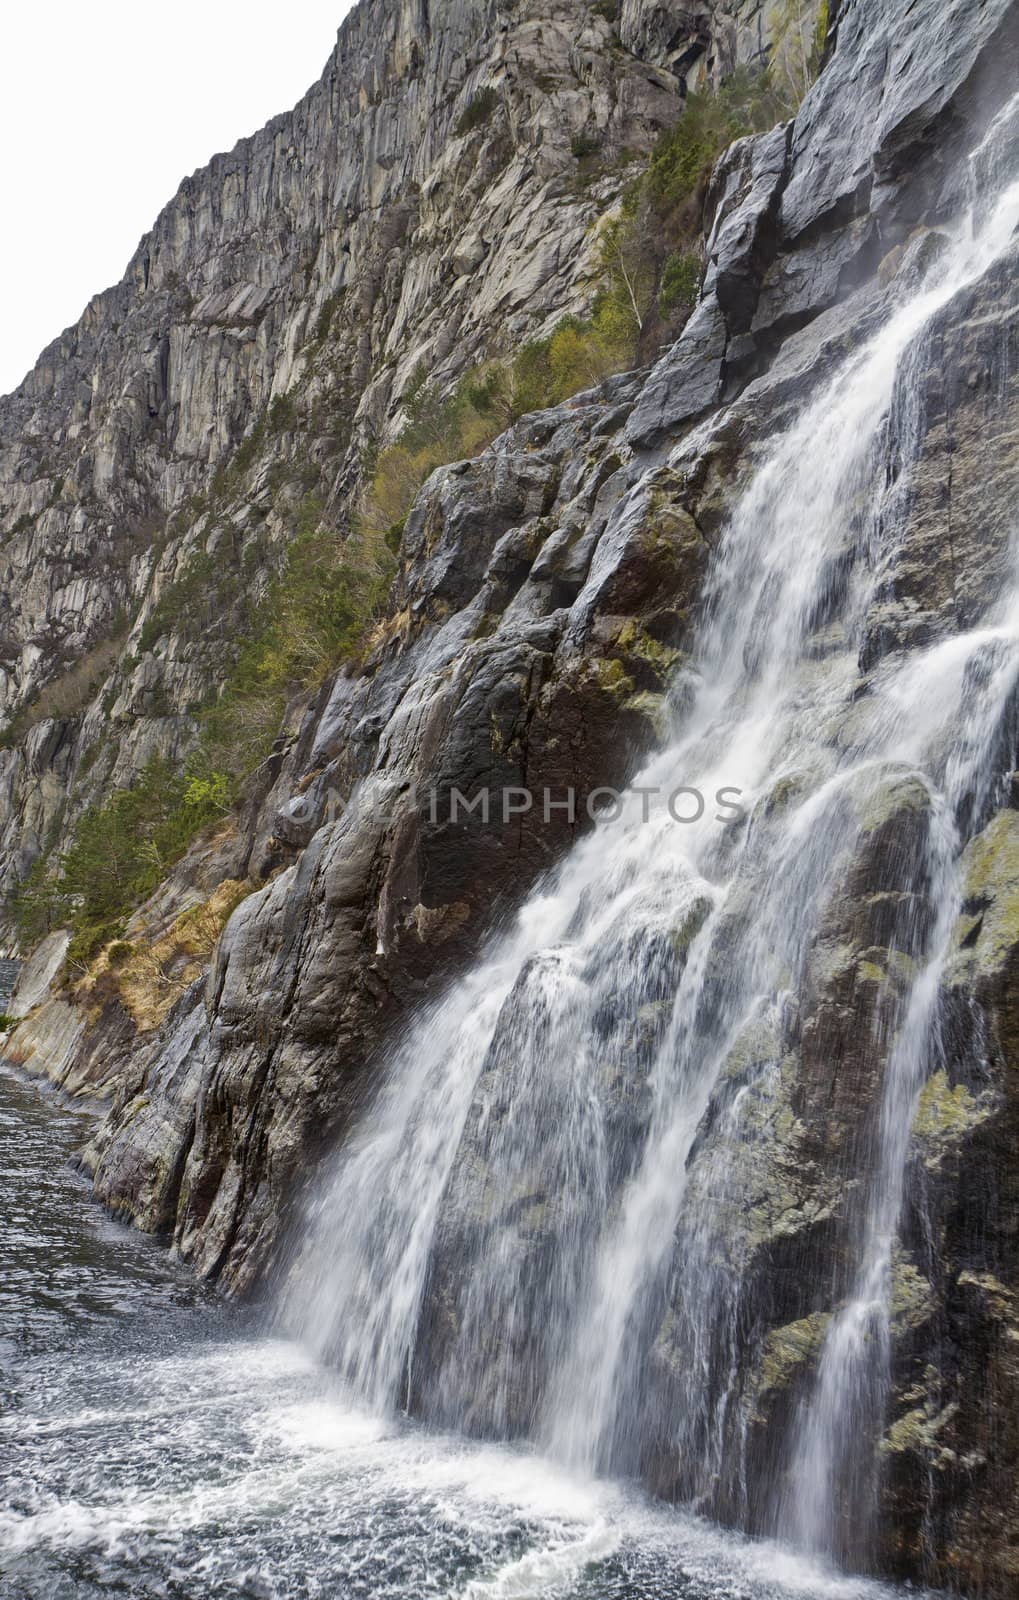 steep mountain with waterfall in norway, europe